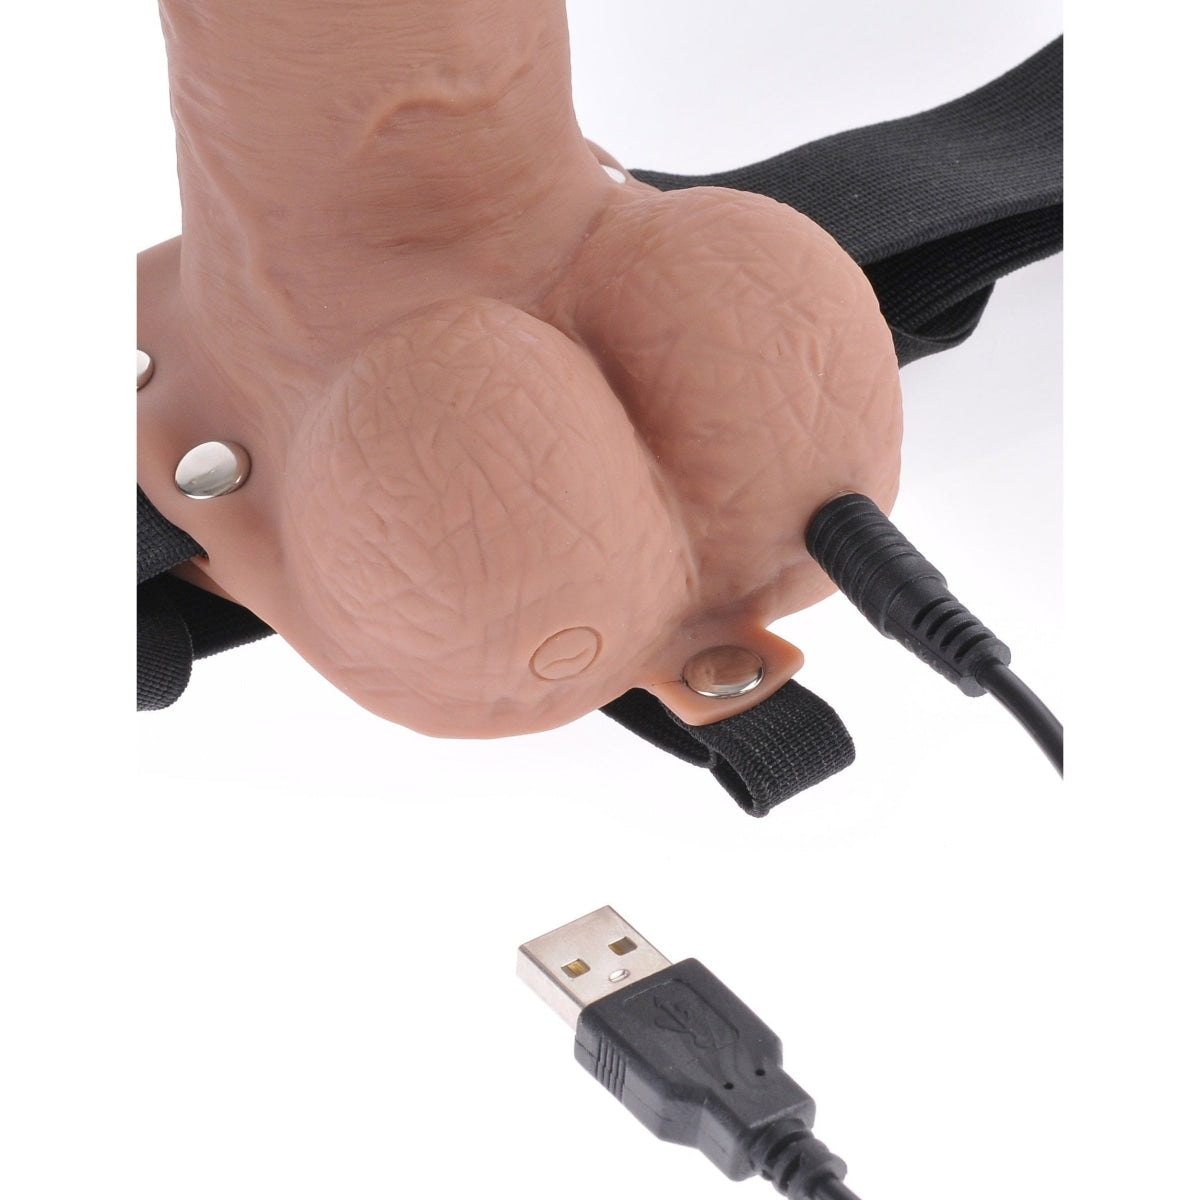 Fetish Fantasy 7 In Hollow Rechargeable Strap-on Remote Tan Intimates Adult Boutique